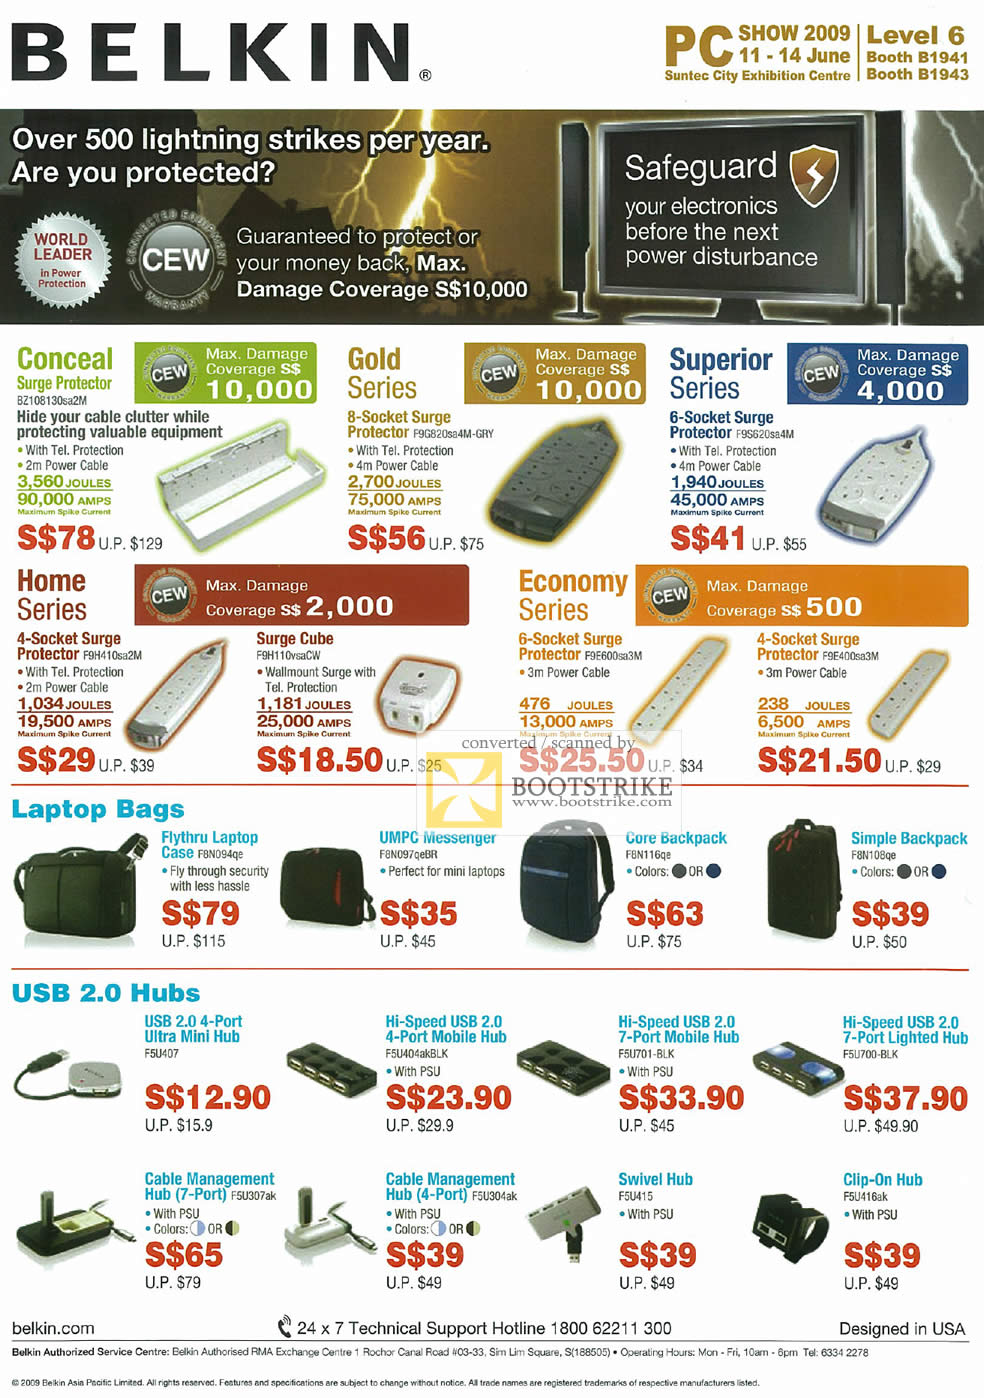 PC Show 2009 price list image brochure of Belkin Surge Protector Gold Superior Home Bags USB Hubs